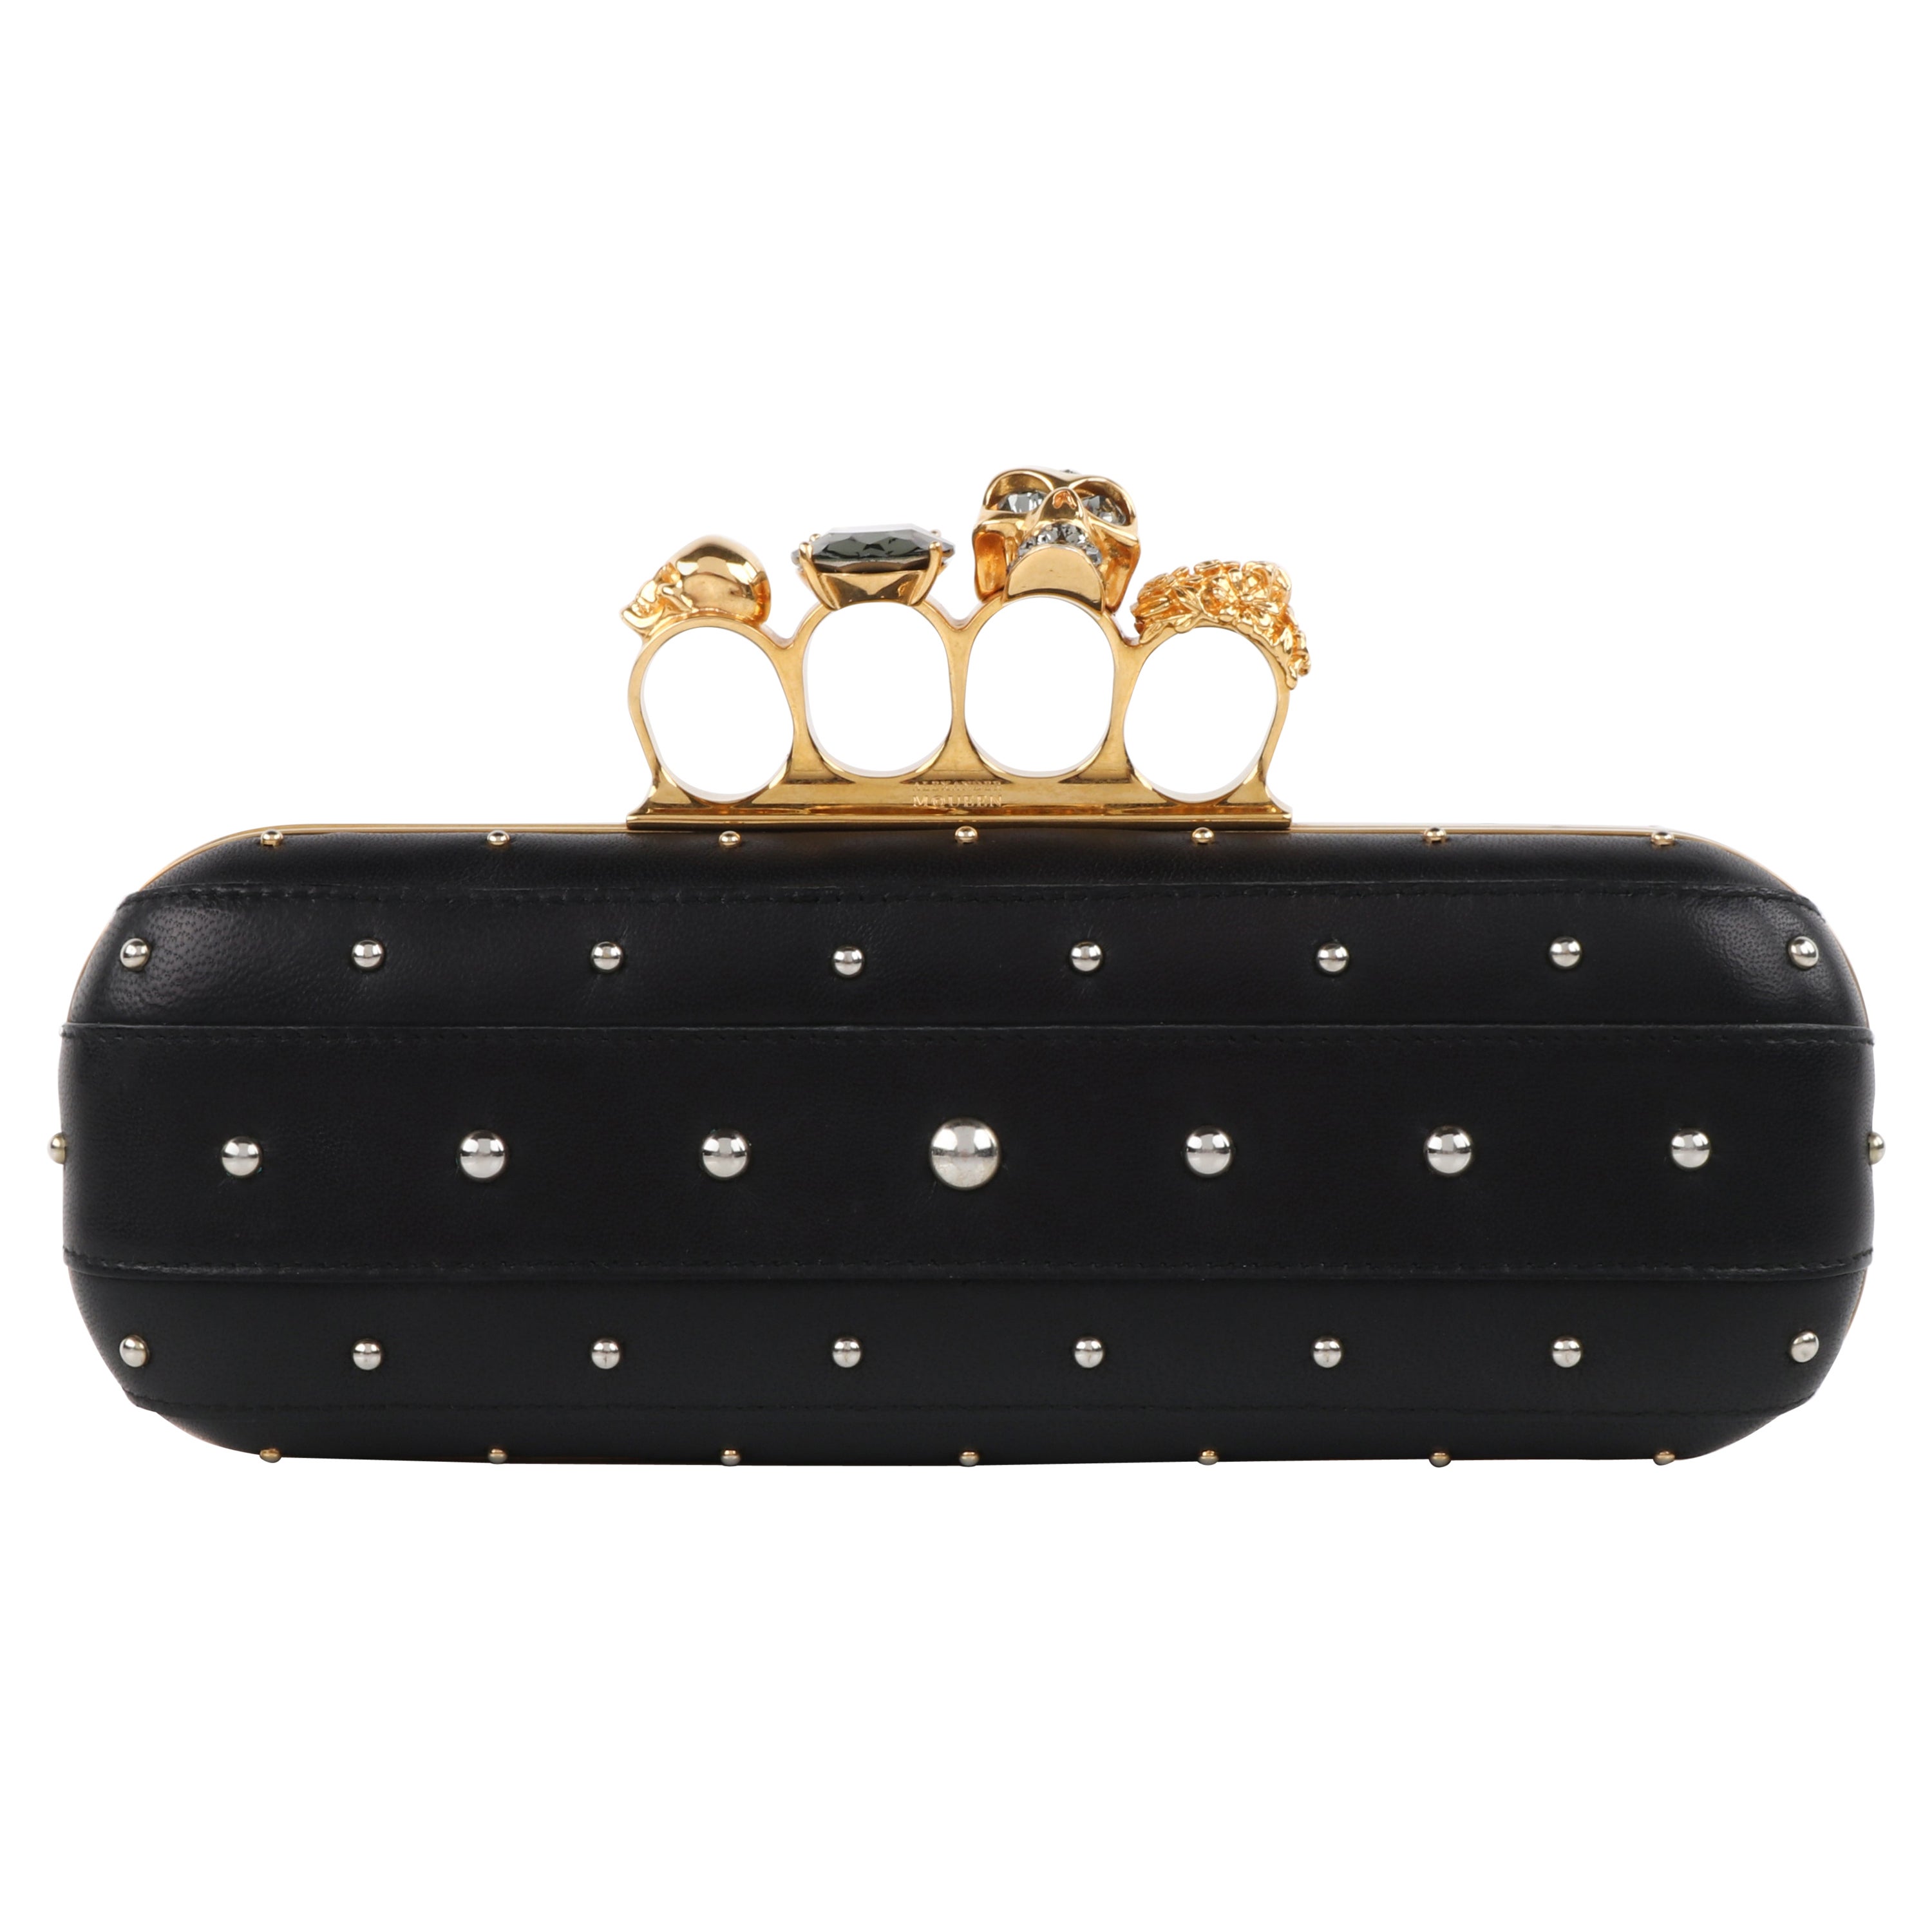 ALEXANDER McQUEEN F/W 2013 Black Gold Leather Studded Knuckle Ring Duster Clutch